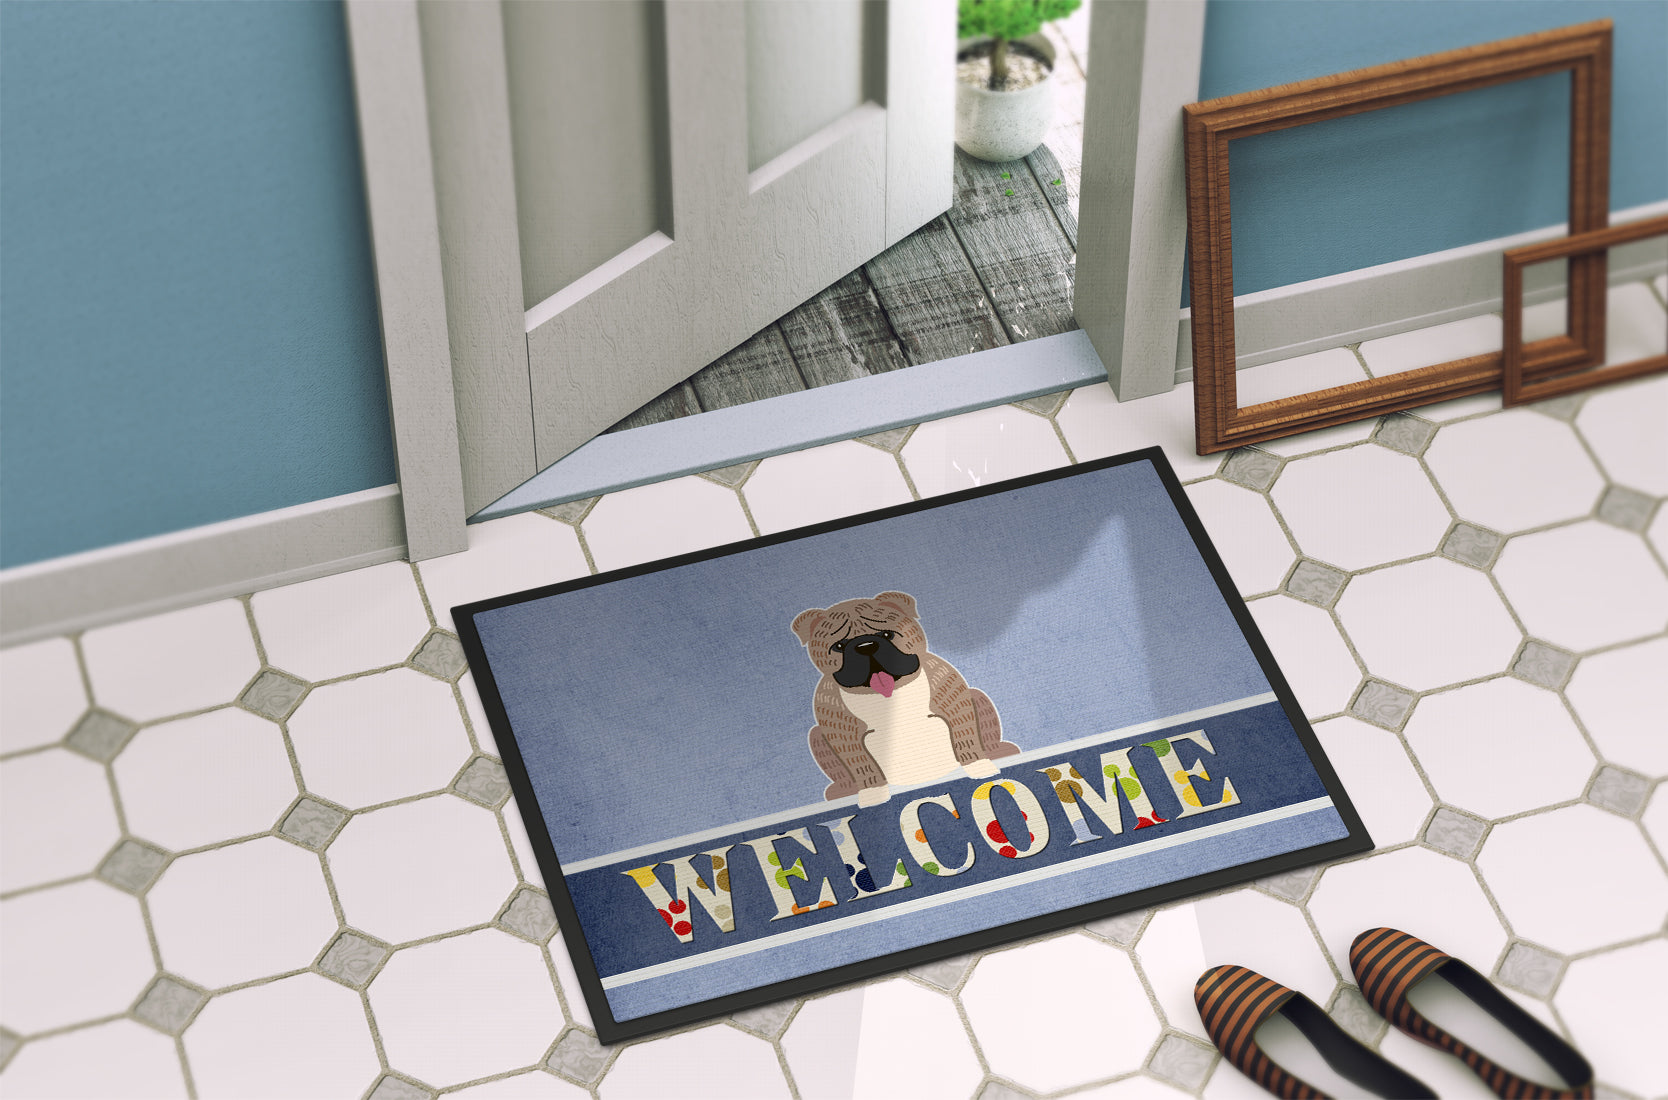 English Bulldog Grey Brindle  Welcome Indoor or Outdoor Mat 18x27 BB5707MAT - the-store.com